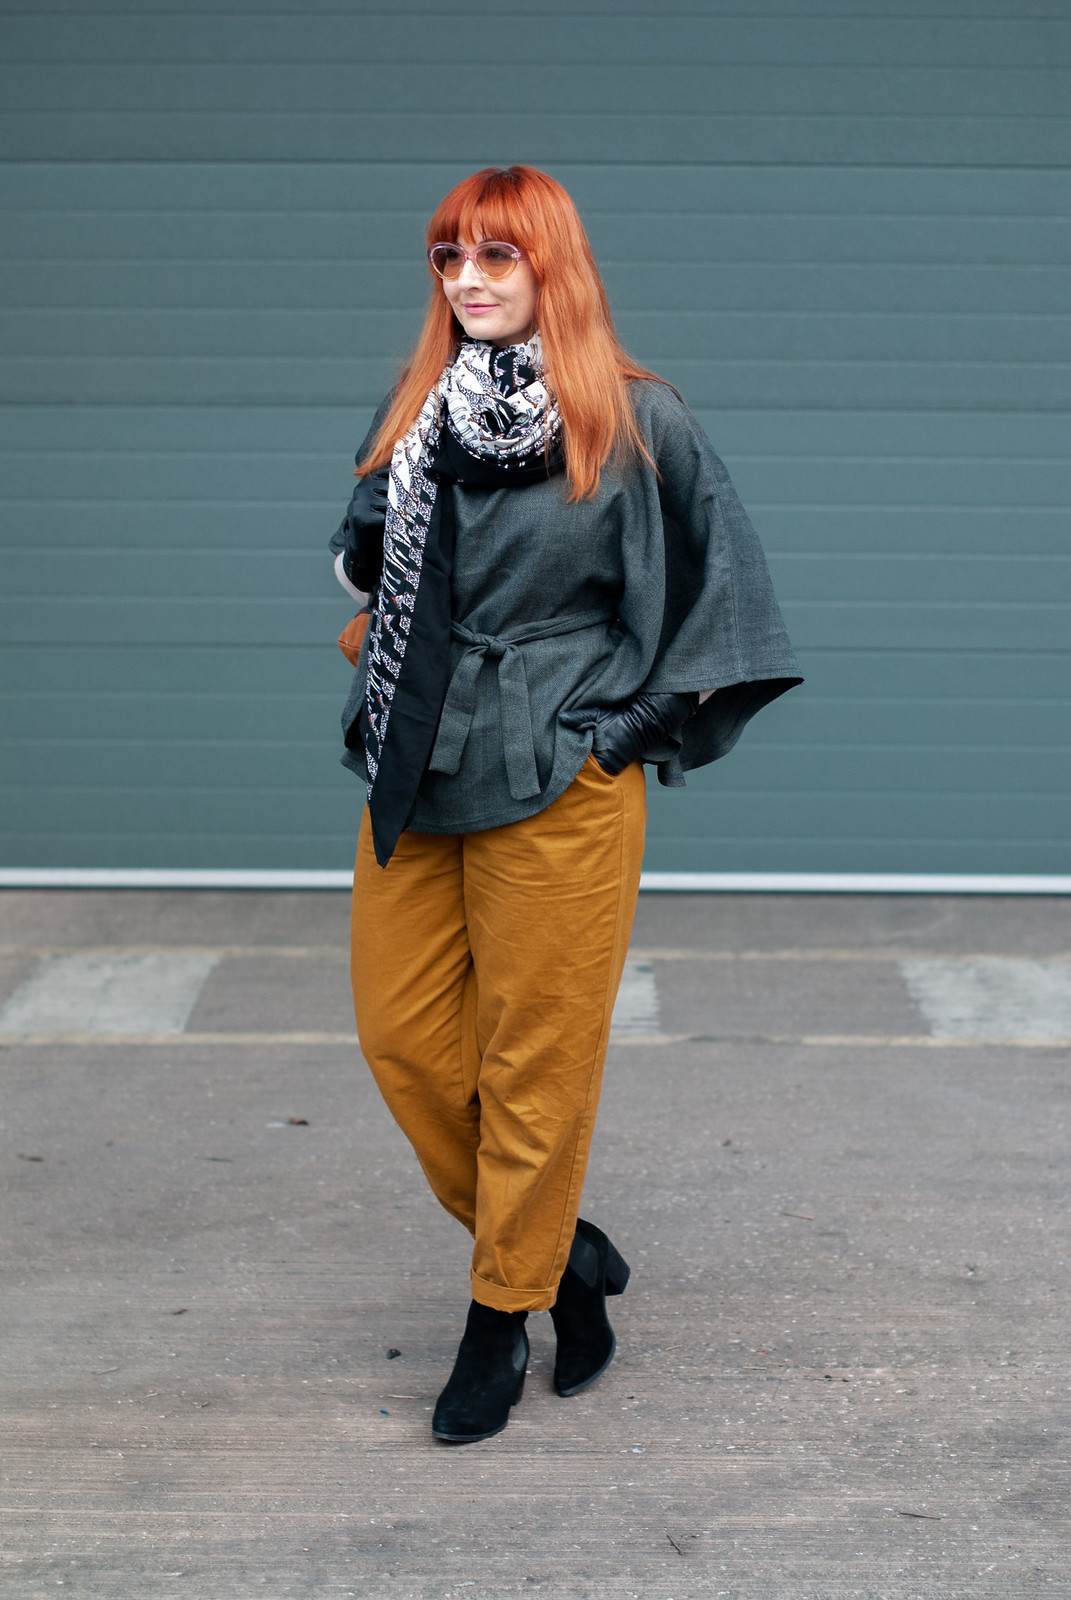 How to Make a Plain Grey Poncho Much More Exciting \ with mustard peg leg trousers \ giraffe print scarf \ black ankle boots \ tartan plaid backpack \ pastel sunglasses | Not Dressed As Lamb, over 40 style